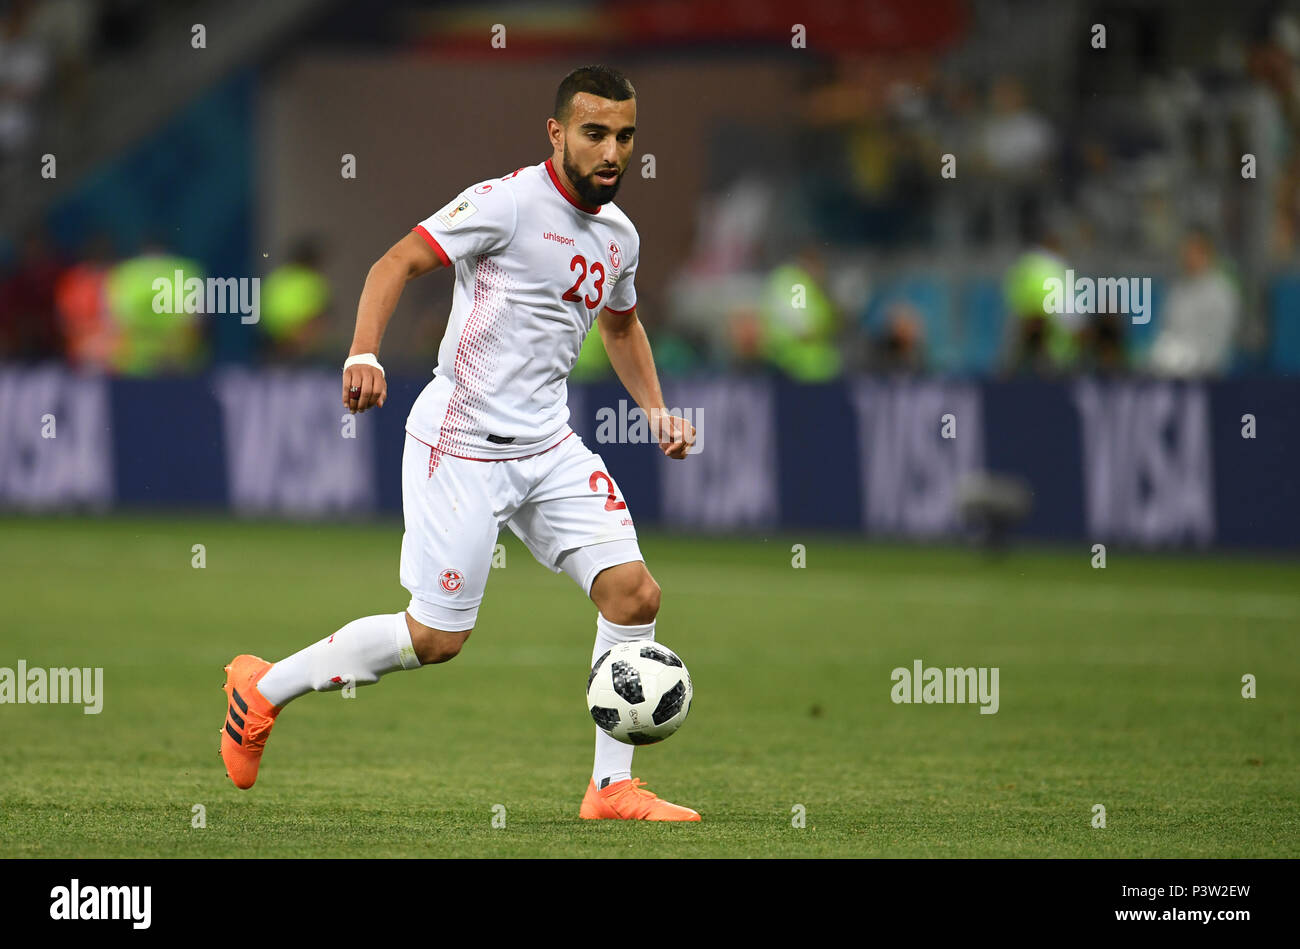 Volgograd, Russia. 18th June, 2018. Soccer: World Cup, Tunisia vs England, group stages, group G, Volgograd Stadium. Tunisia's Naim Sliti in action. Credit: Andreas Gebert/dpa/Alamy Live News Stock Photo